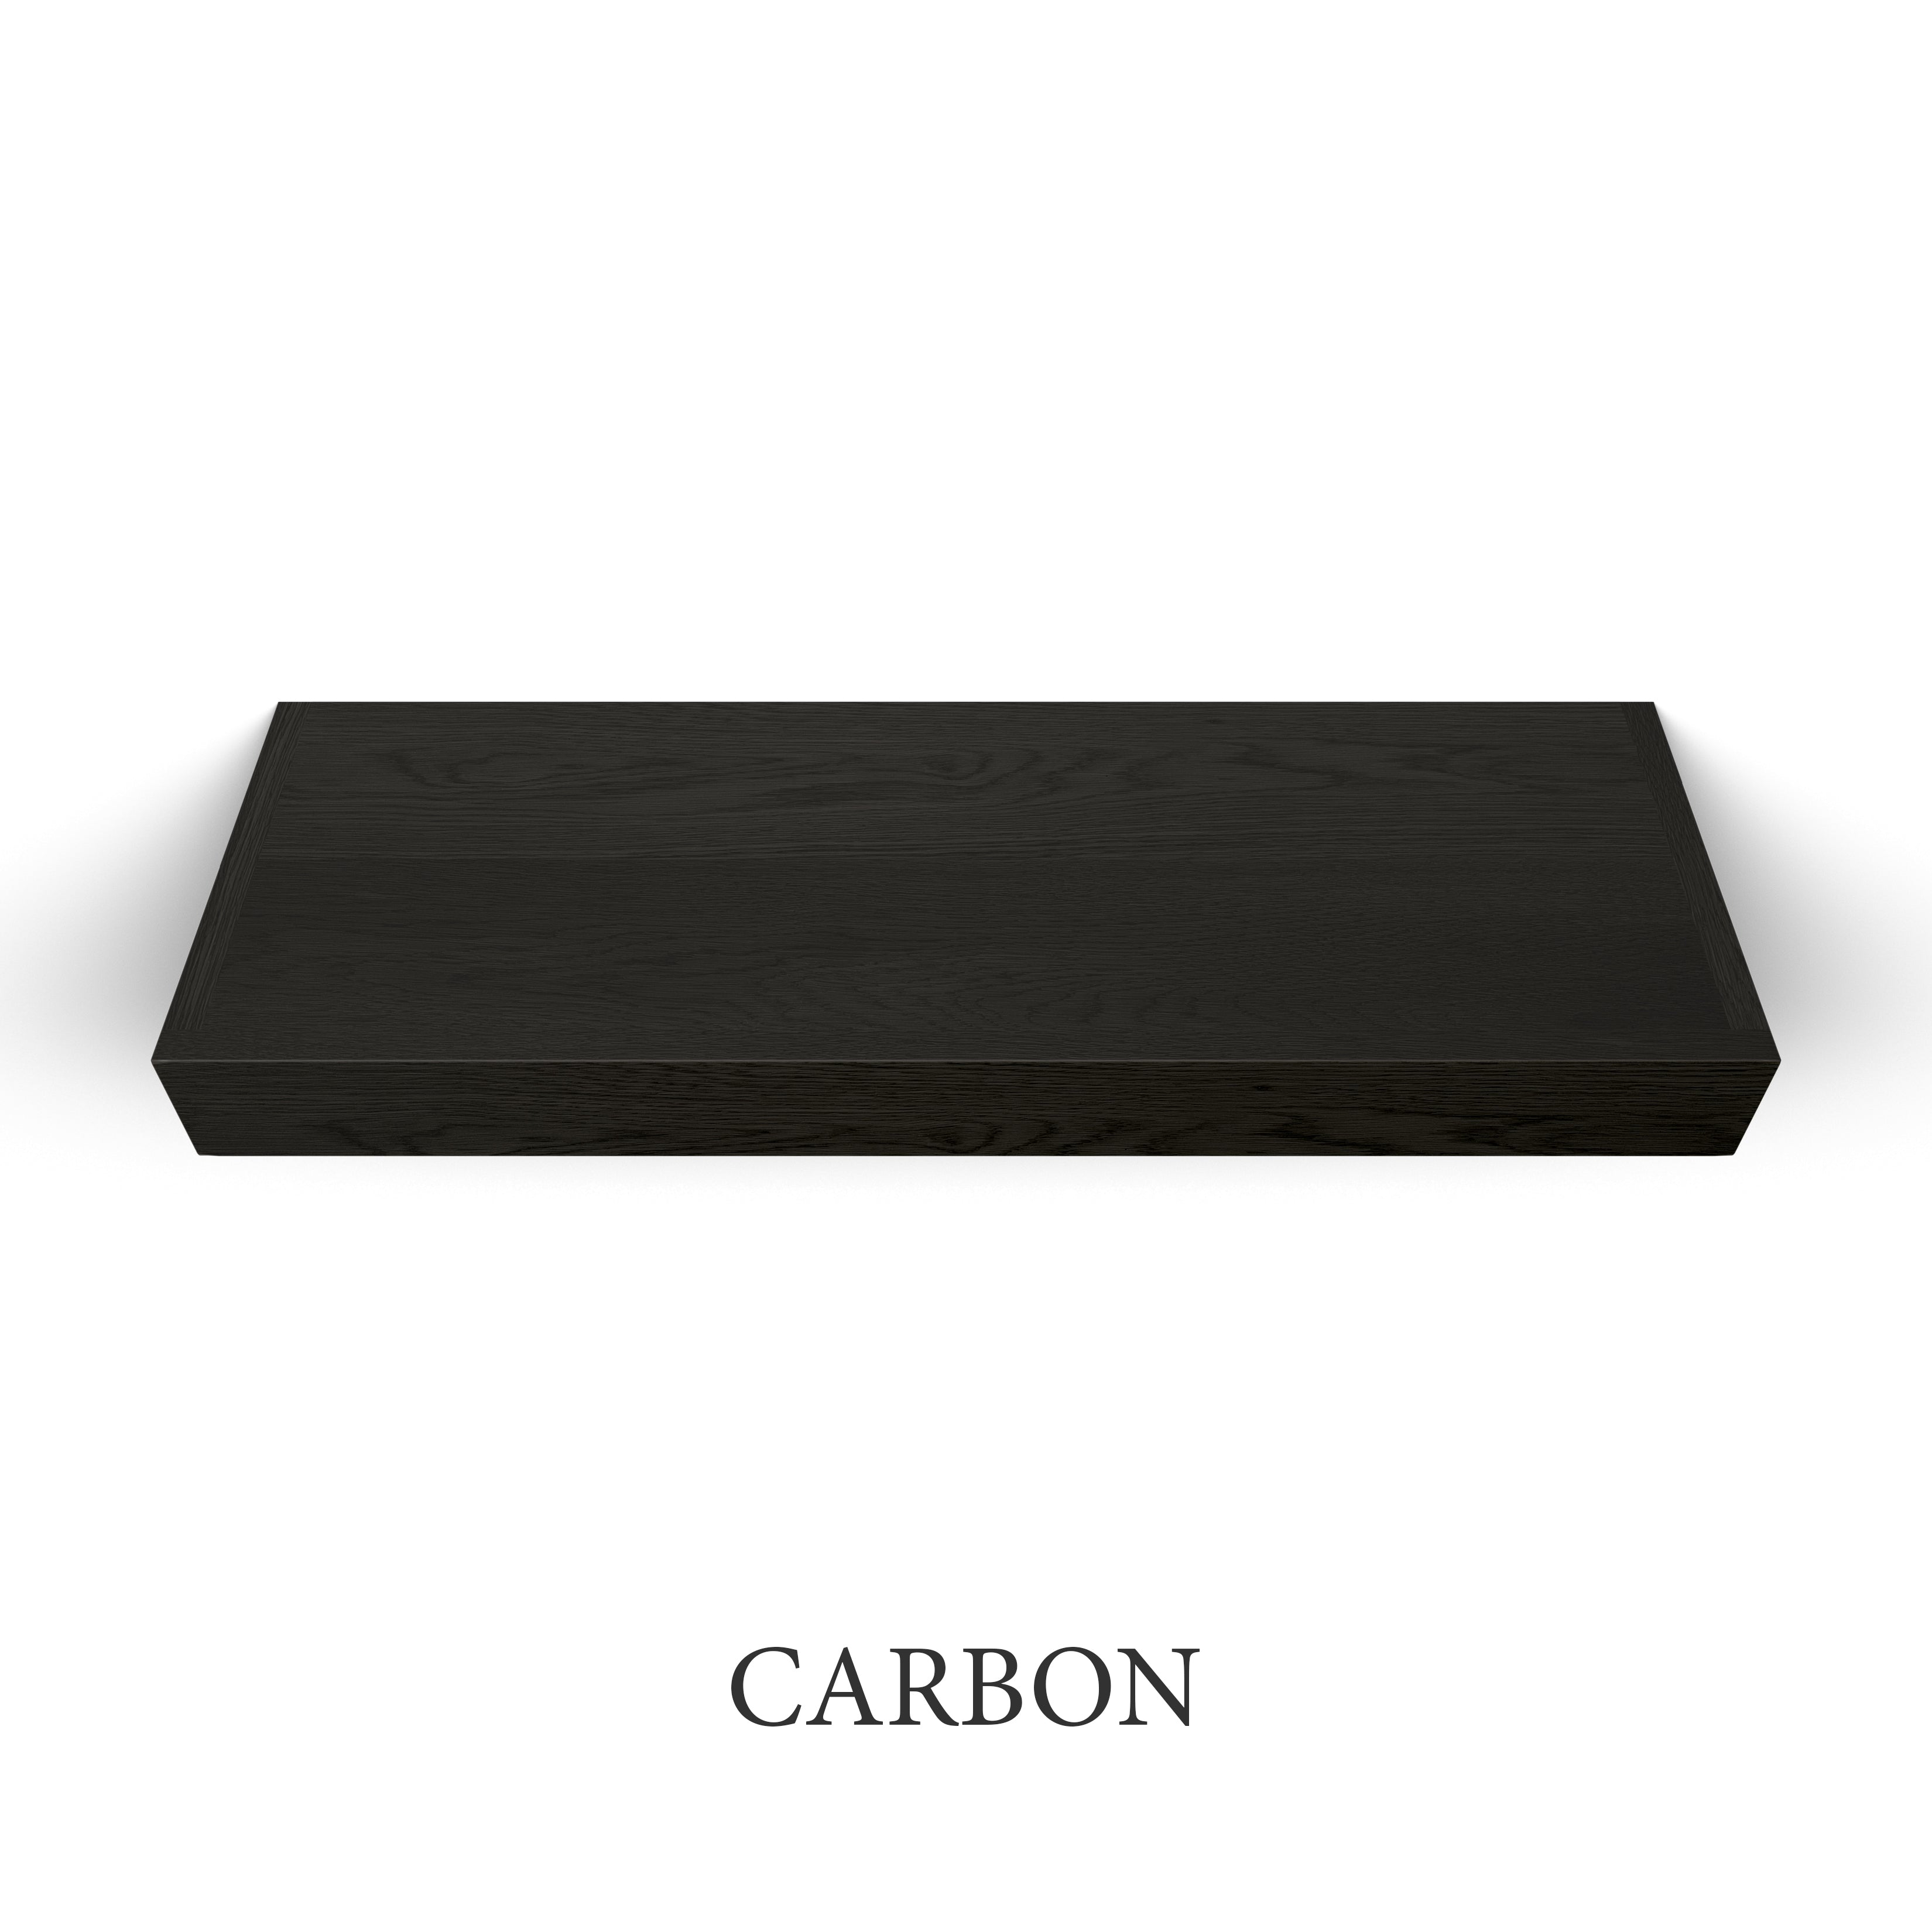 carbon White Oak 3 Inch Thick LED Lighted Floating Shelf - Hardwired